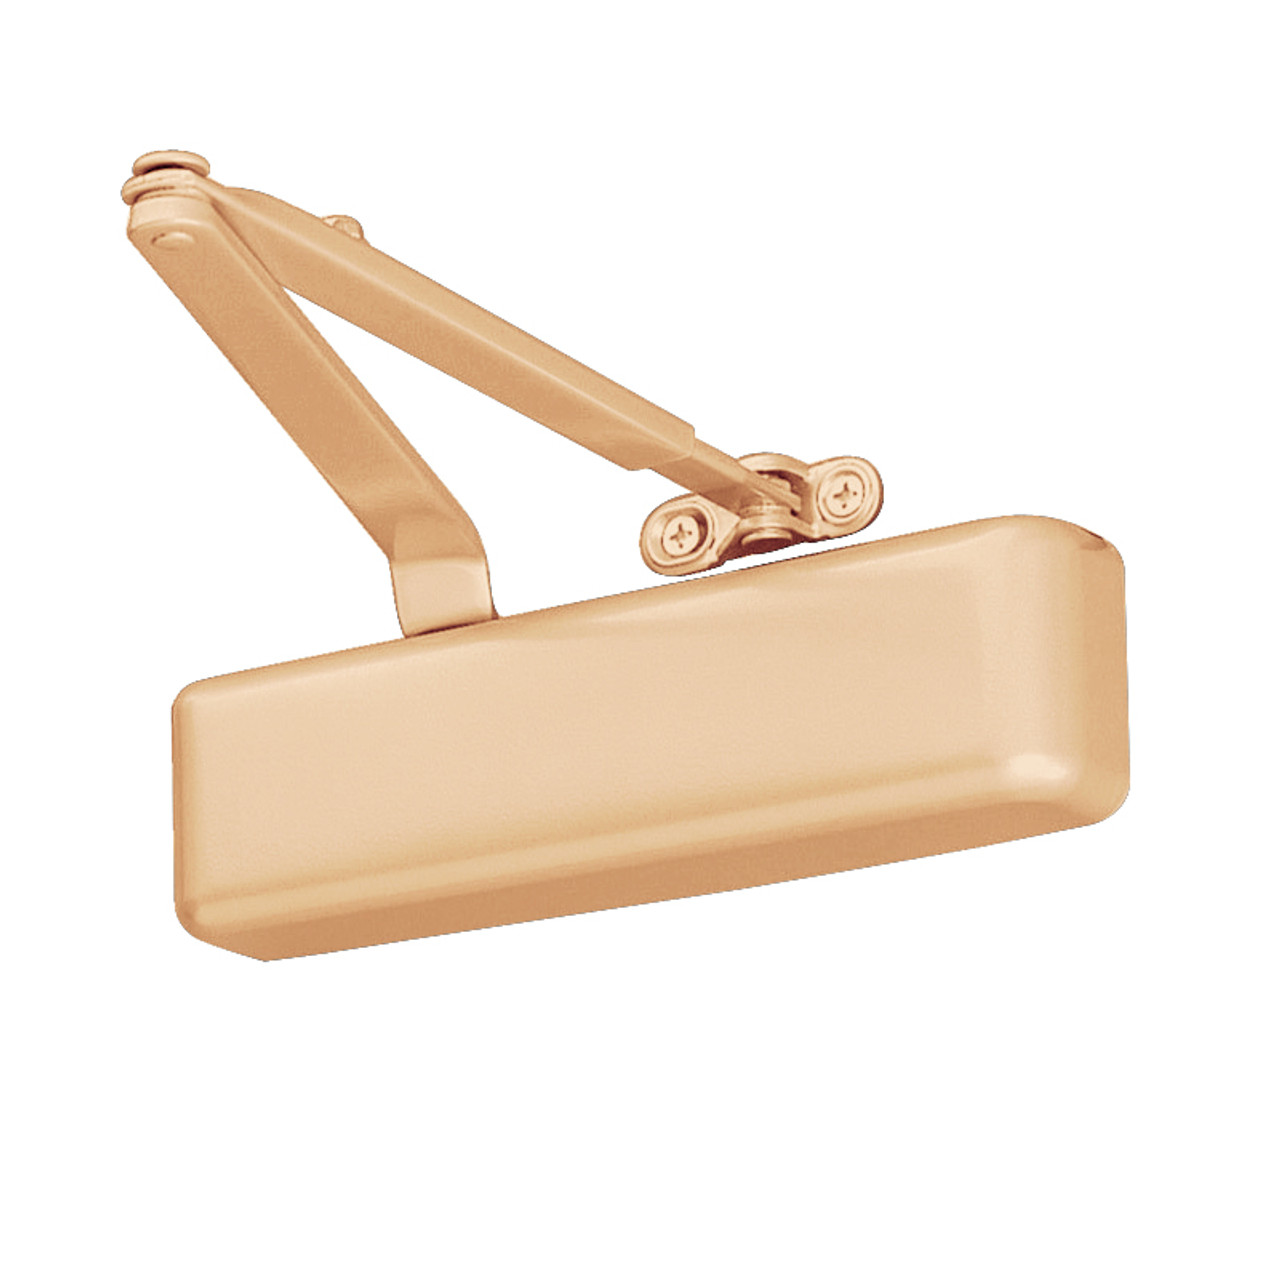 4031-H-US10 LCN Door Closer with Hold Open Arm in Satin Bronze Finish